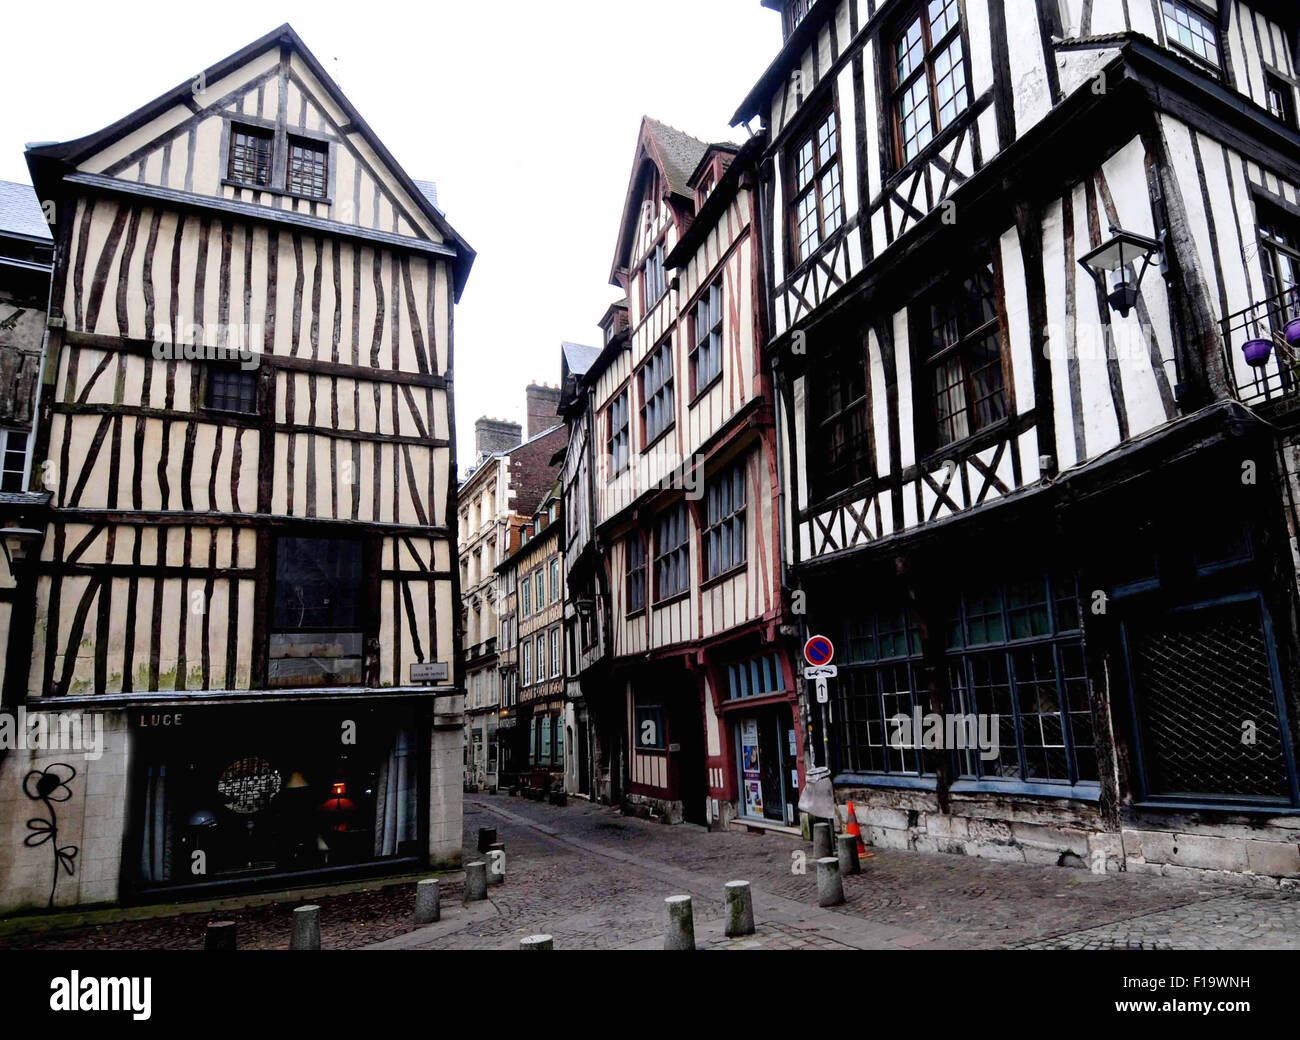 Half timber houses in Rouen, France. On the right, the houses with tiered 1st and 2nd storey. Stock Photo